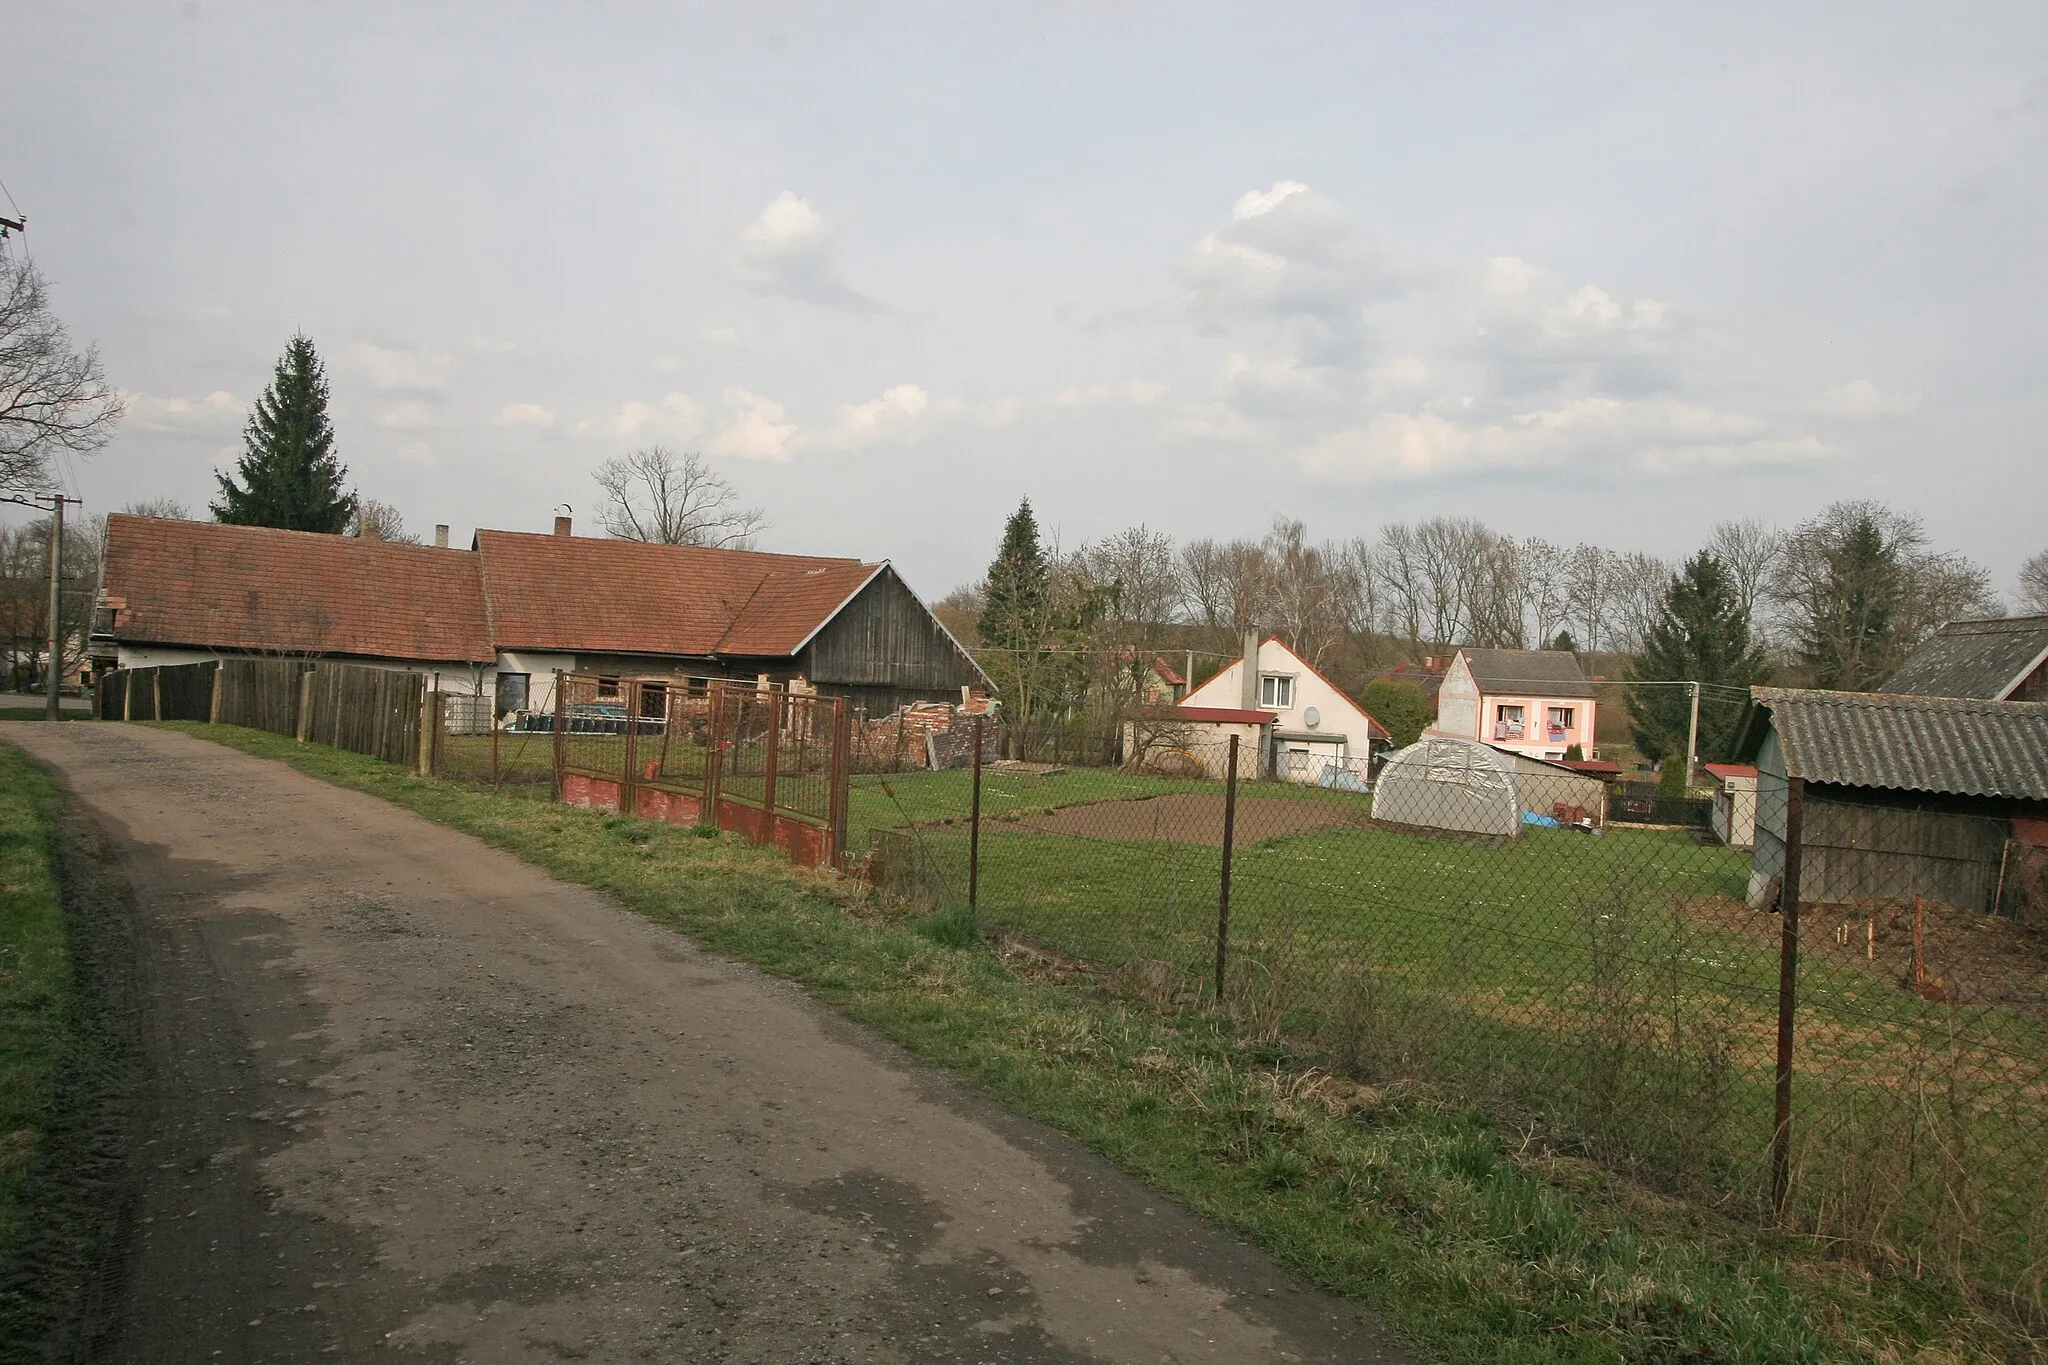 Photo showing: Chotělice čp. 67
Camera location 50° 18′ 16.14″ N, 15° 27′ 54.45″ E View this and other nearby images on: OpenStreetMap 50.304482;   15.465126

This file was created as a part of the photographic program of Wikimedia Czech Republic. Project: Foto českých obcí The program supports Wikimedia Commons photographers in the Czech Republic.